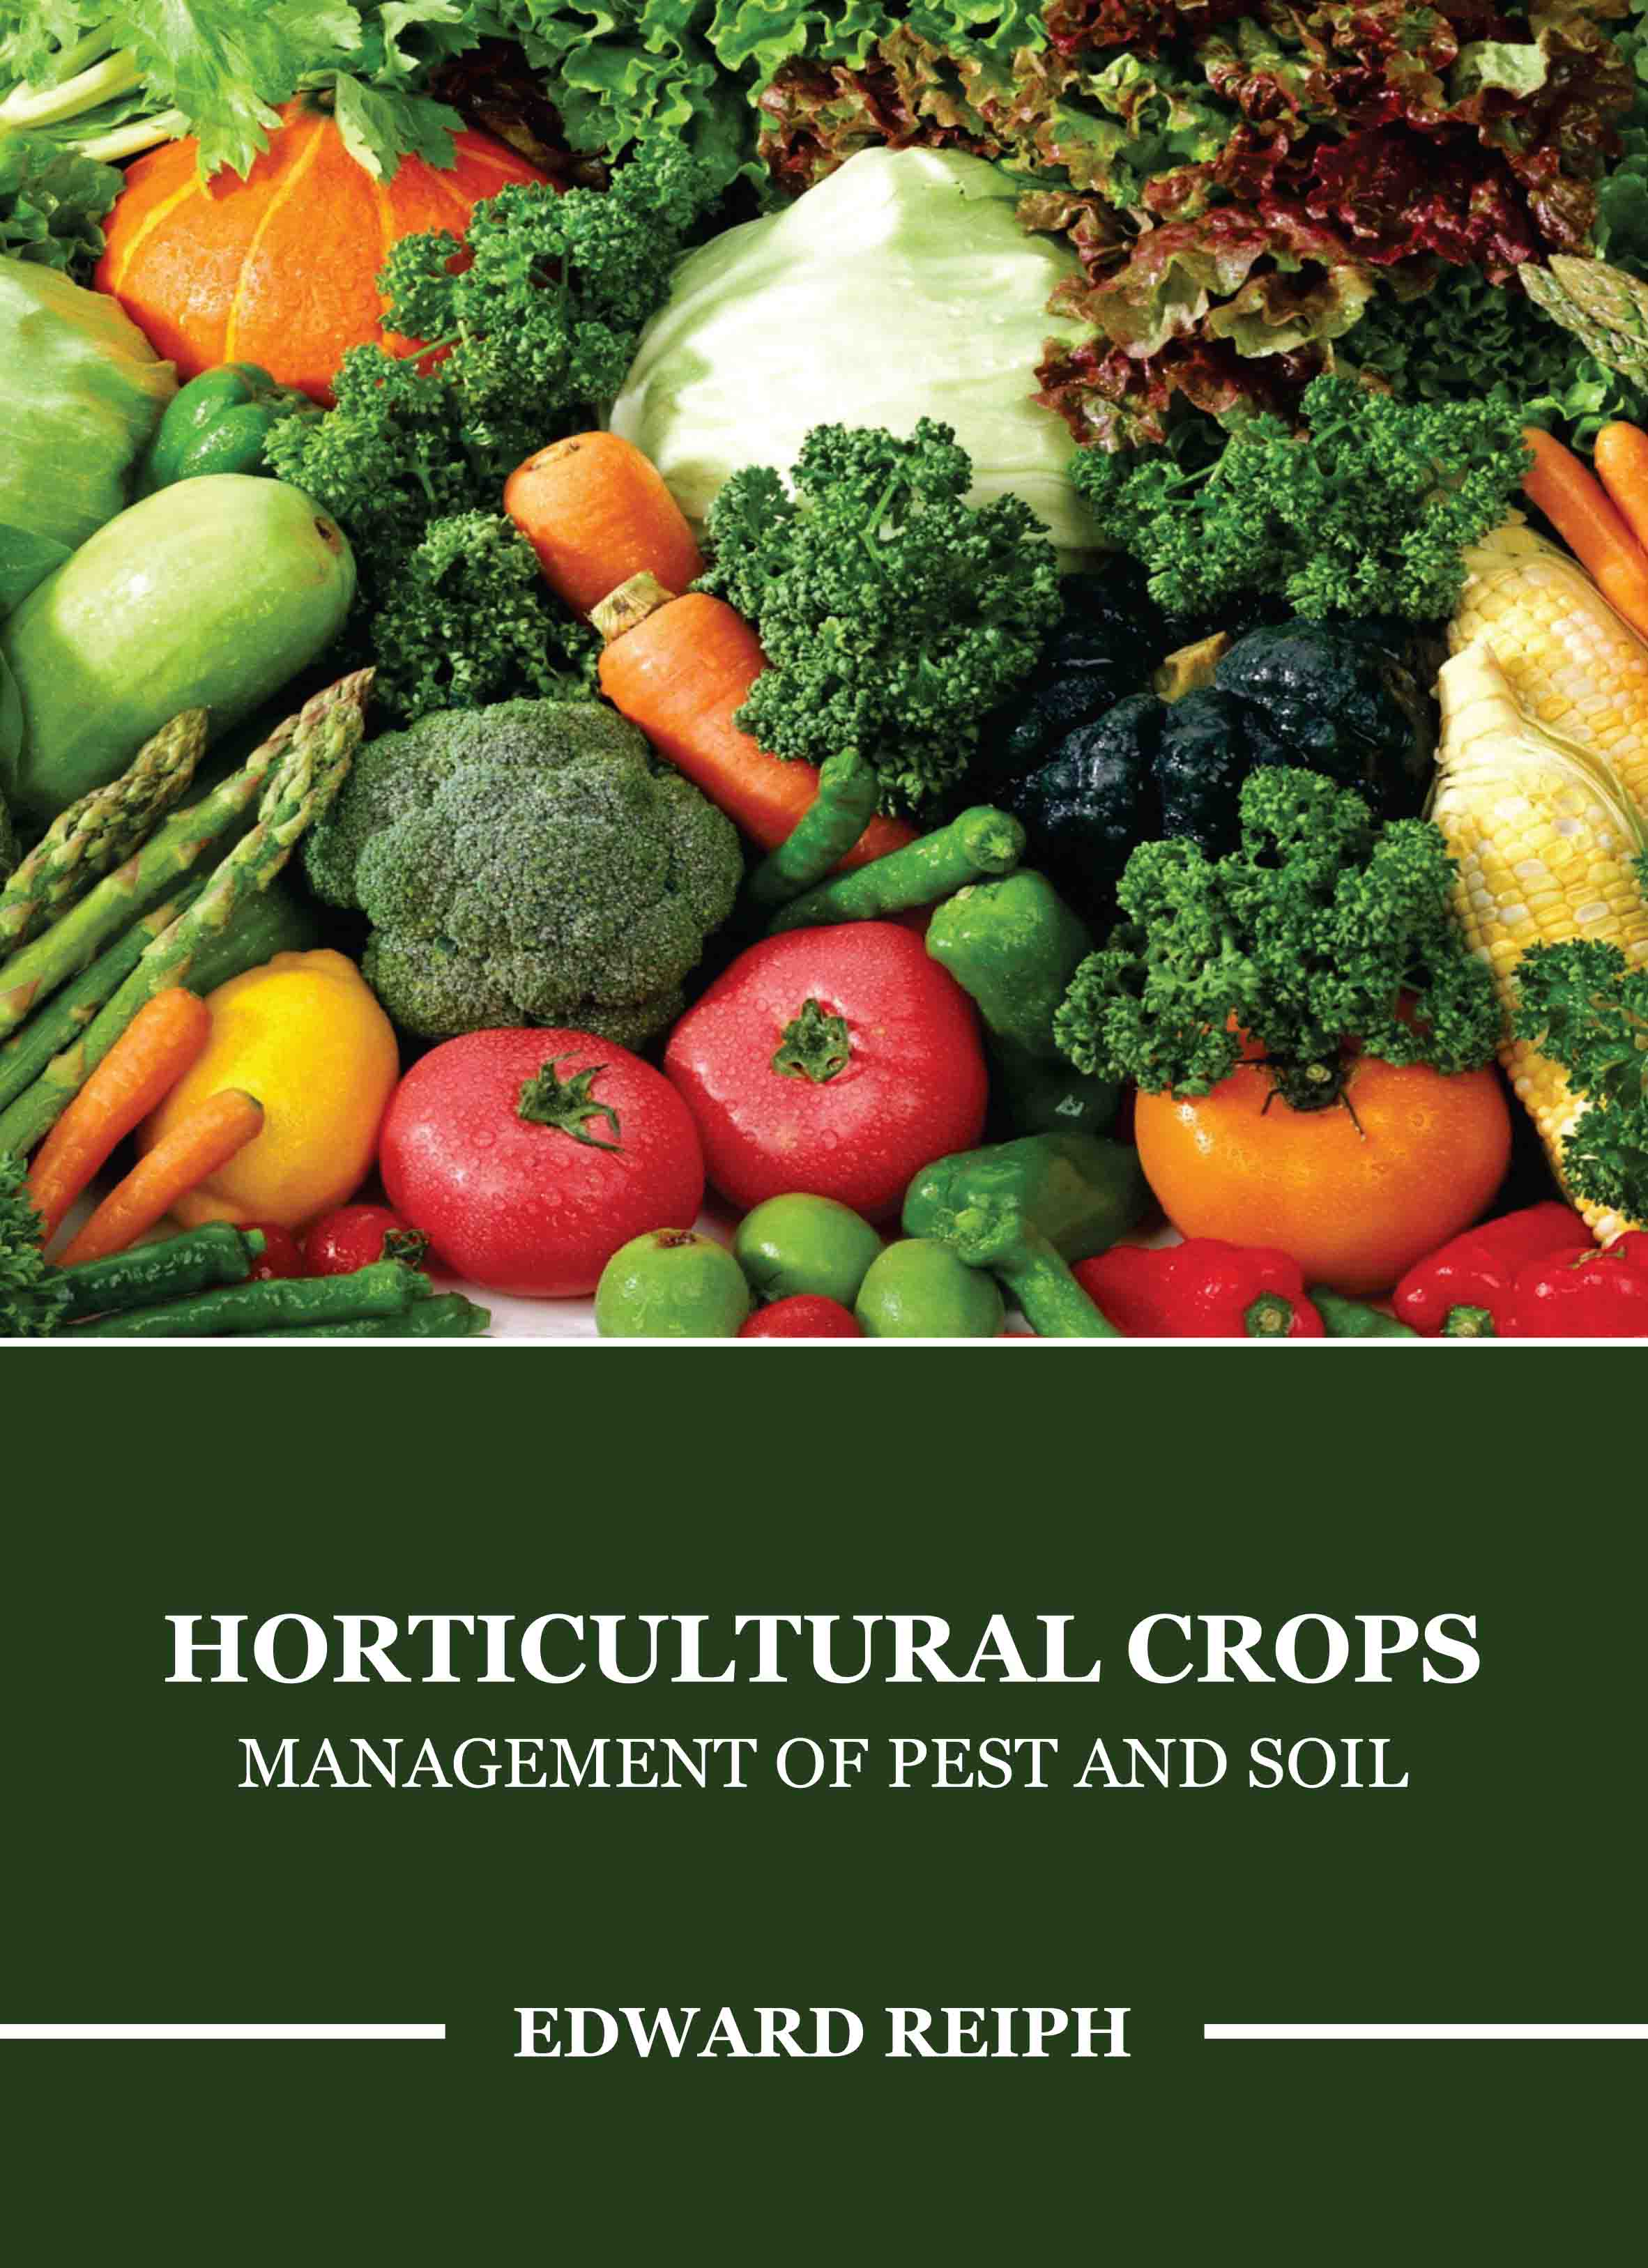 Horticultural Crops: Management of Pest and Soil